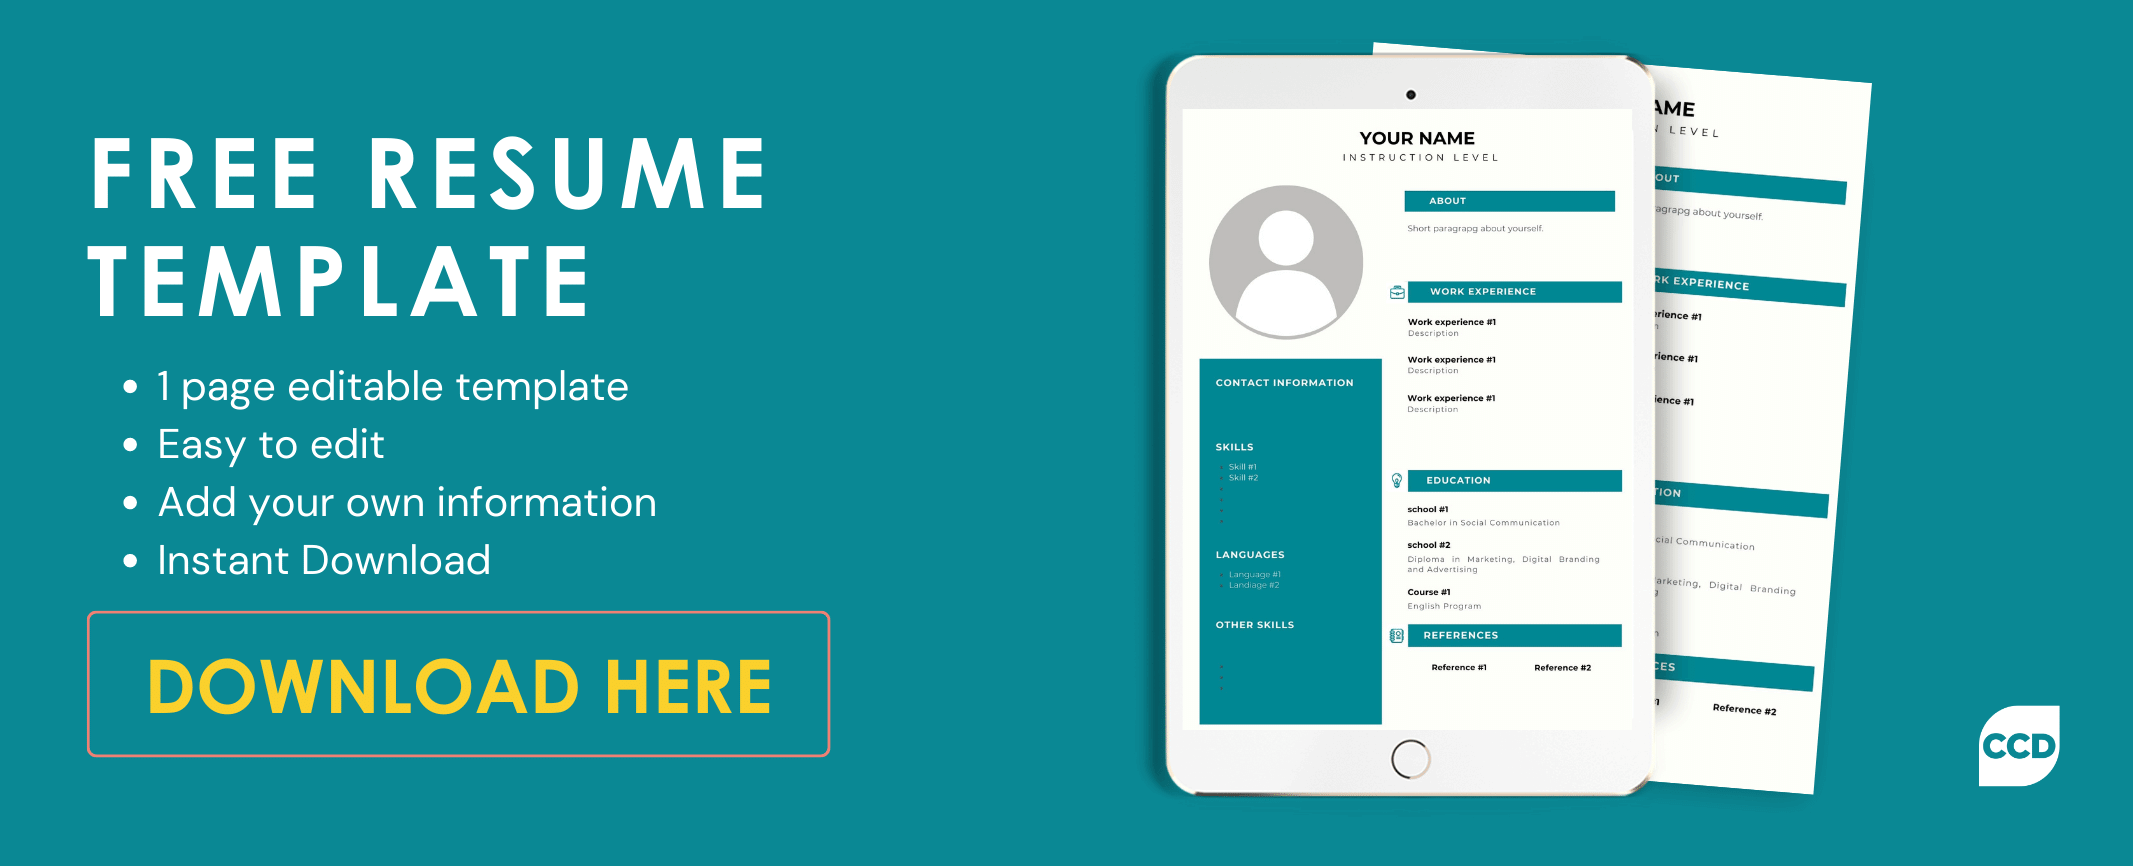 Download Resume Banner in teal color with a CTA button